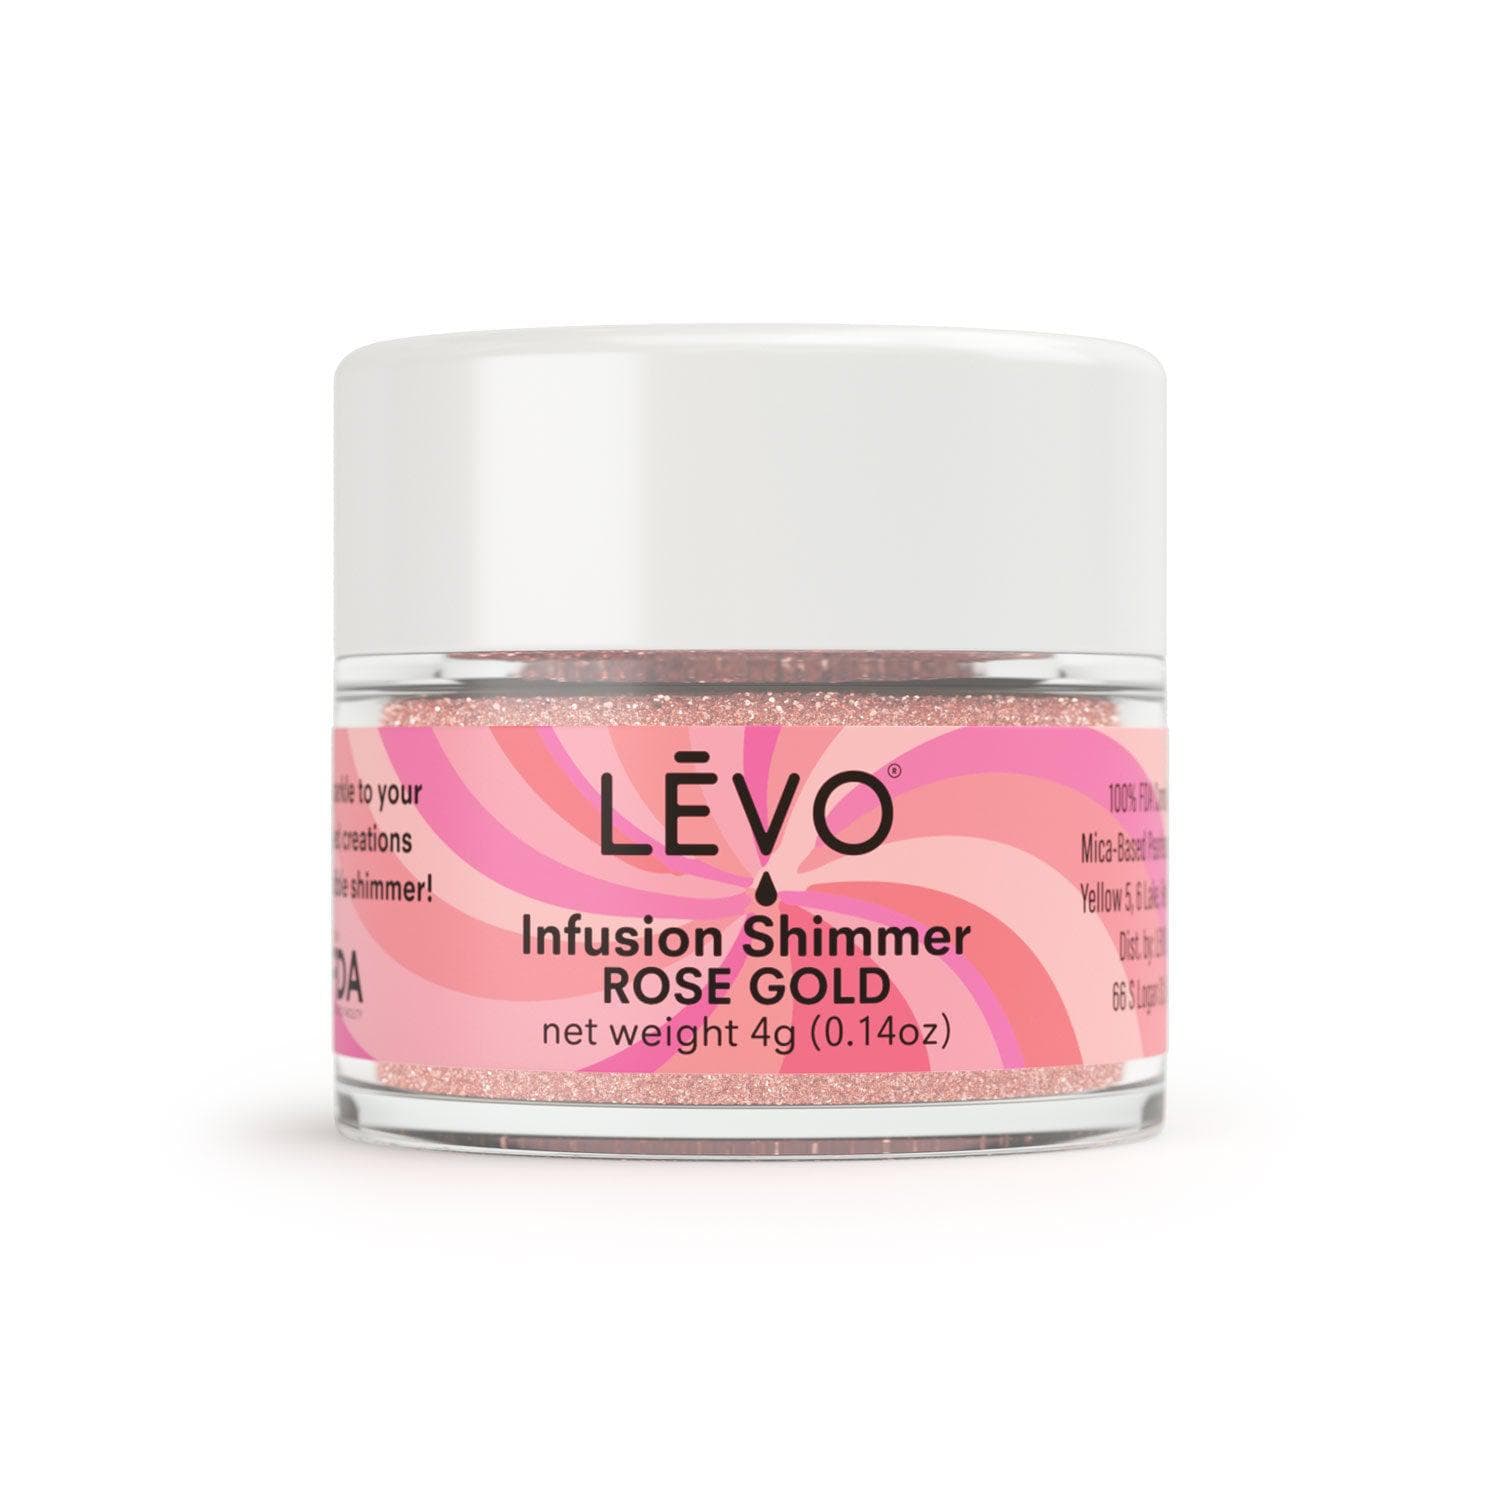 Gummy Glitter + Infusion Shimmer Kit - LEVO Oil Infusion, Inc.